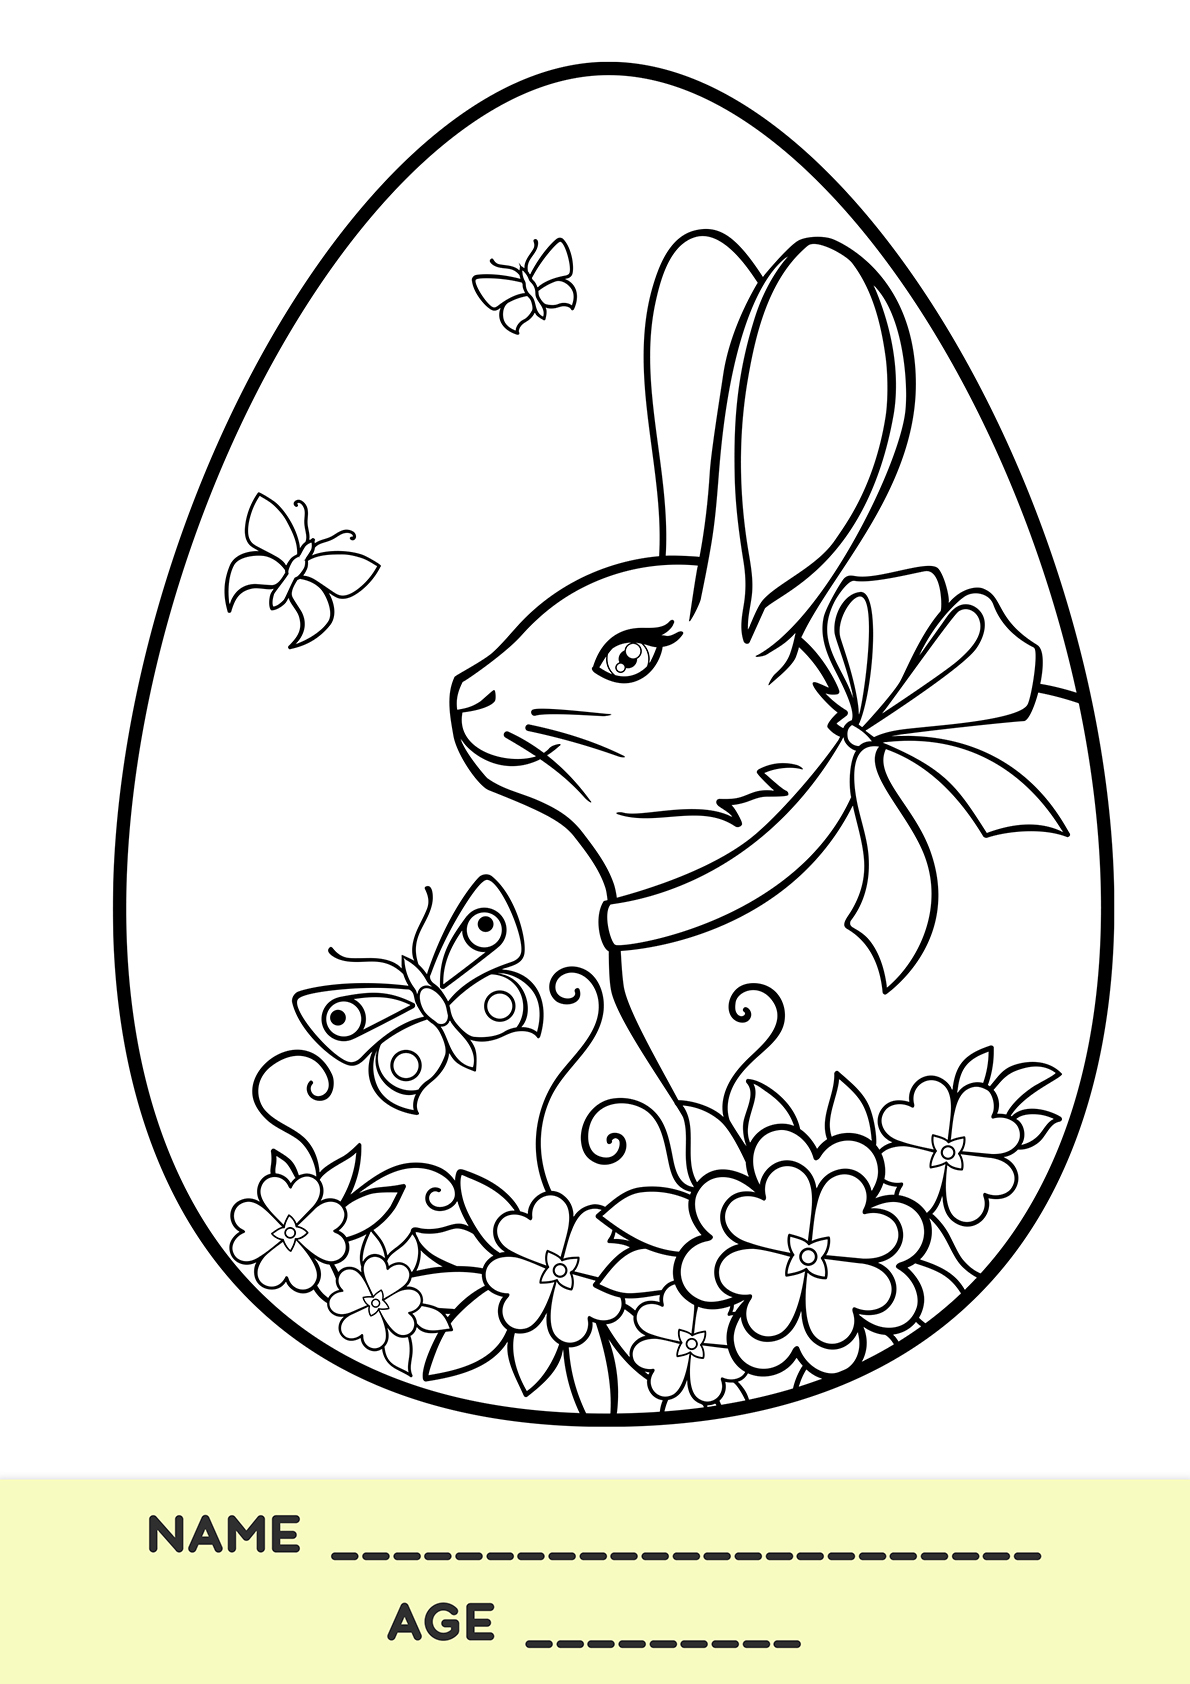 Download FREE Easter Colouring In for the Kids - River 949